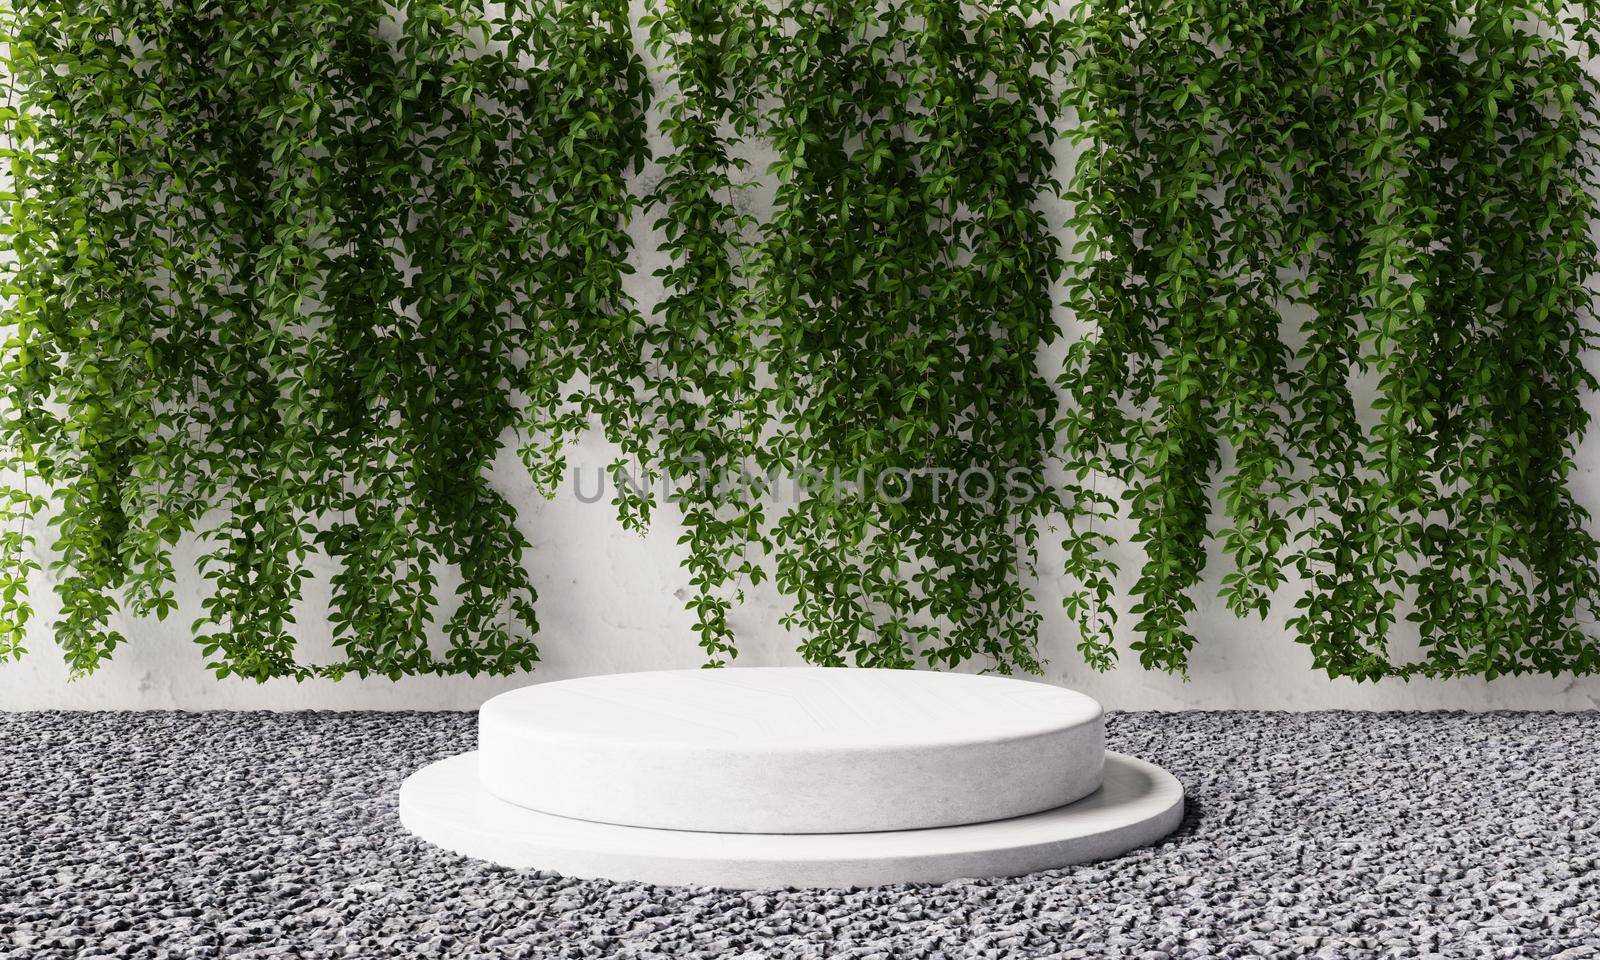 Round cylinder product stone podium in backyard garden with vine Virginia creeper on white concrete wall background. Exterior nature and architecture concept. 3D illustration rendering